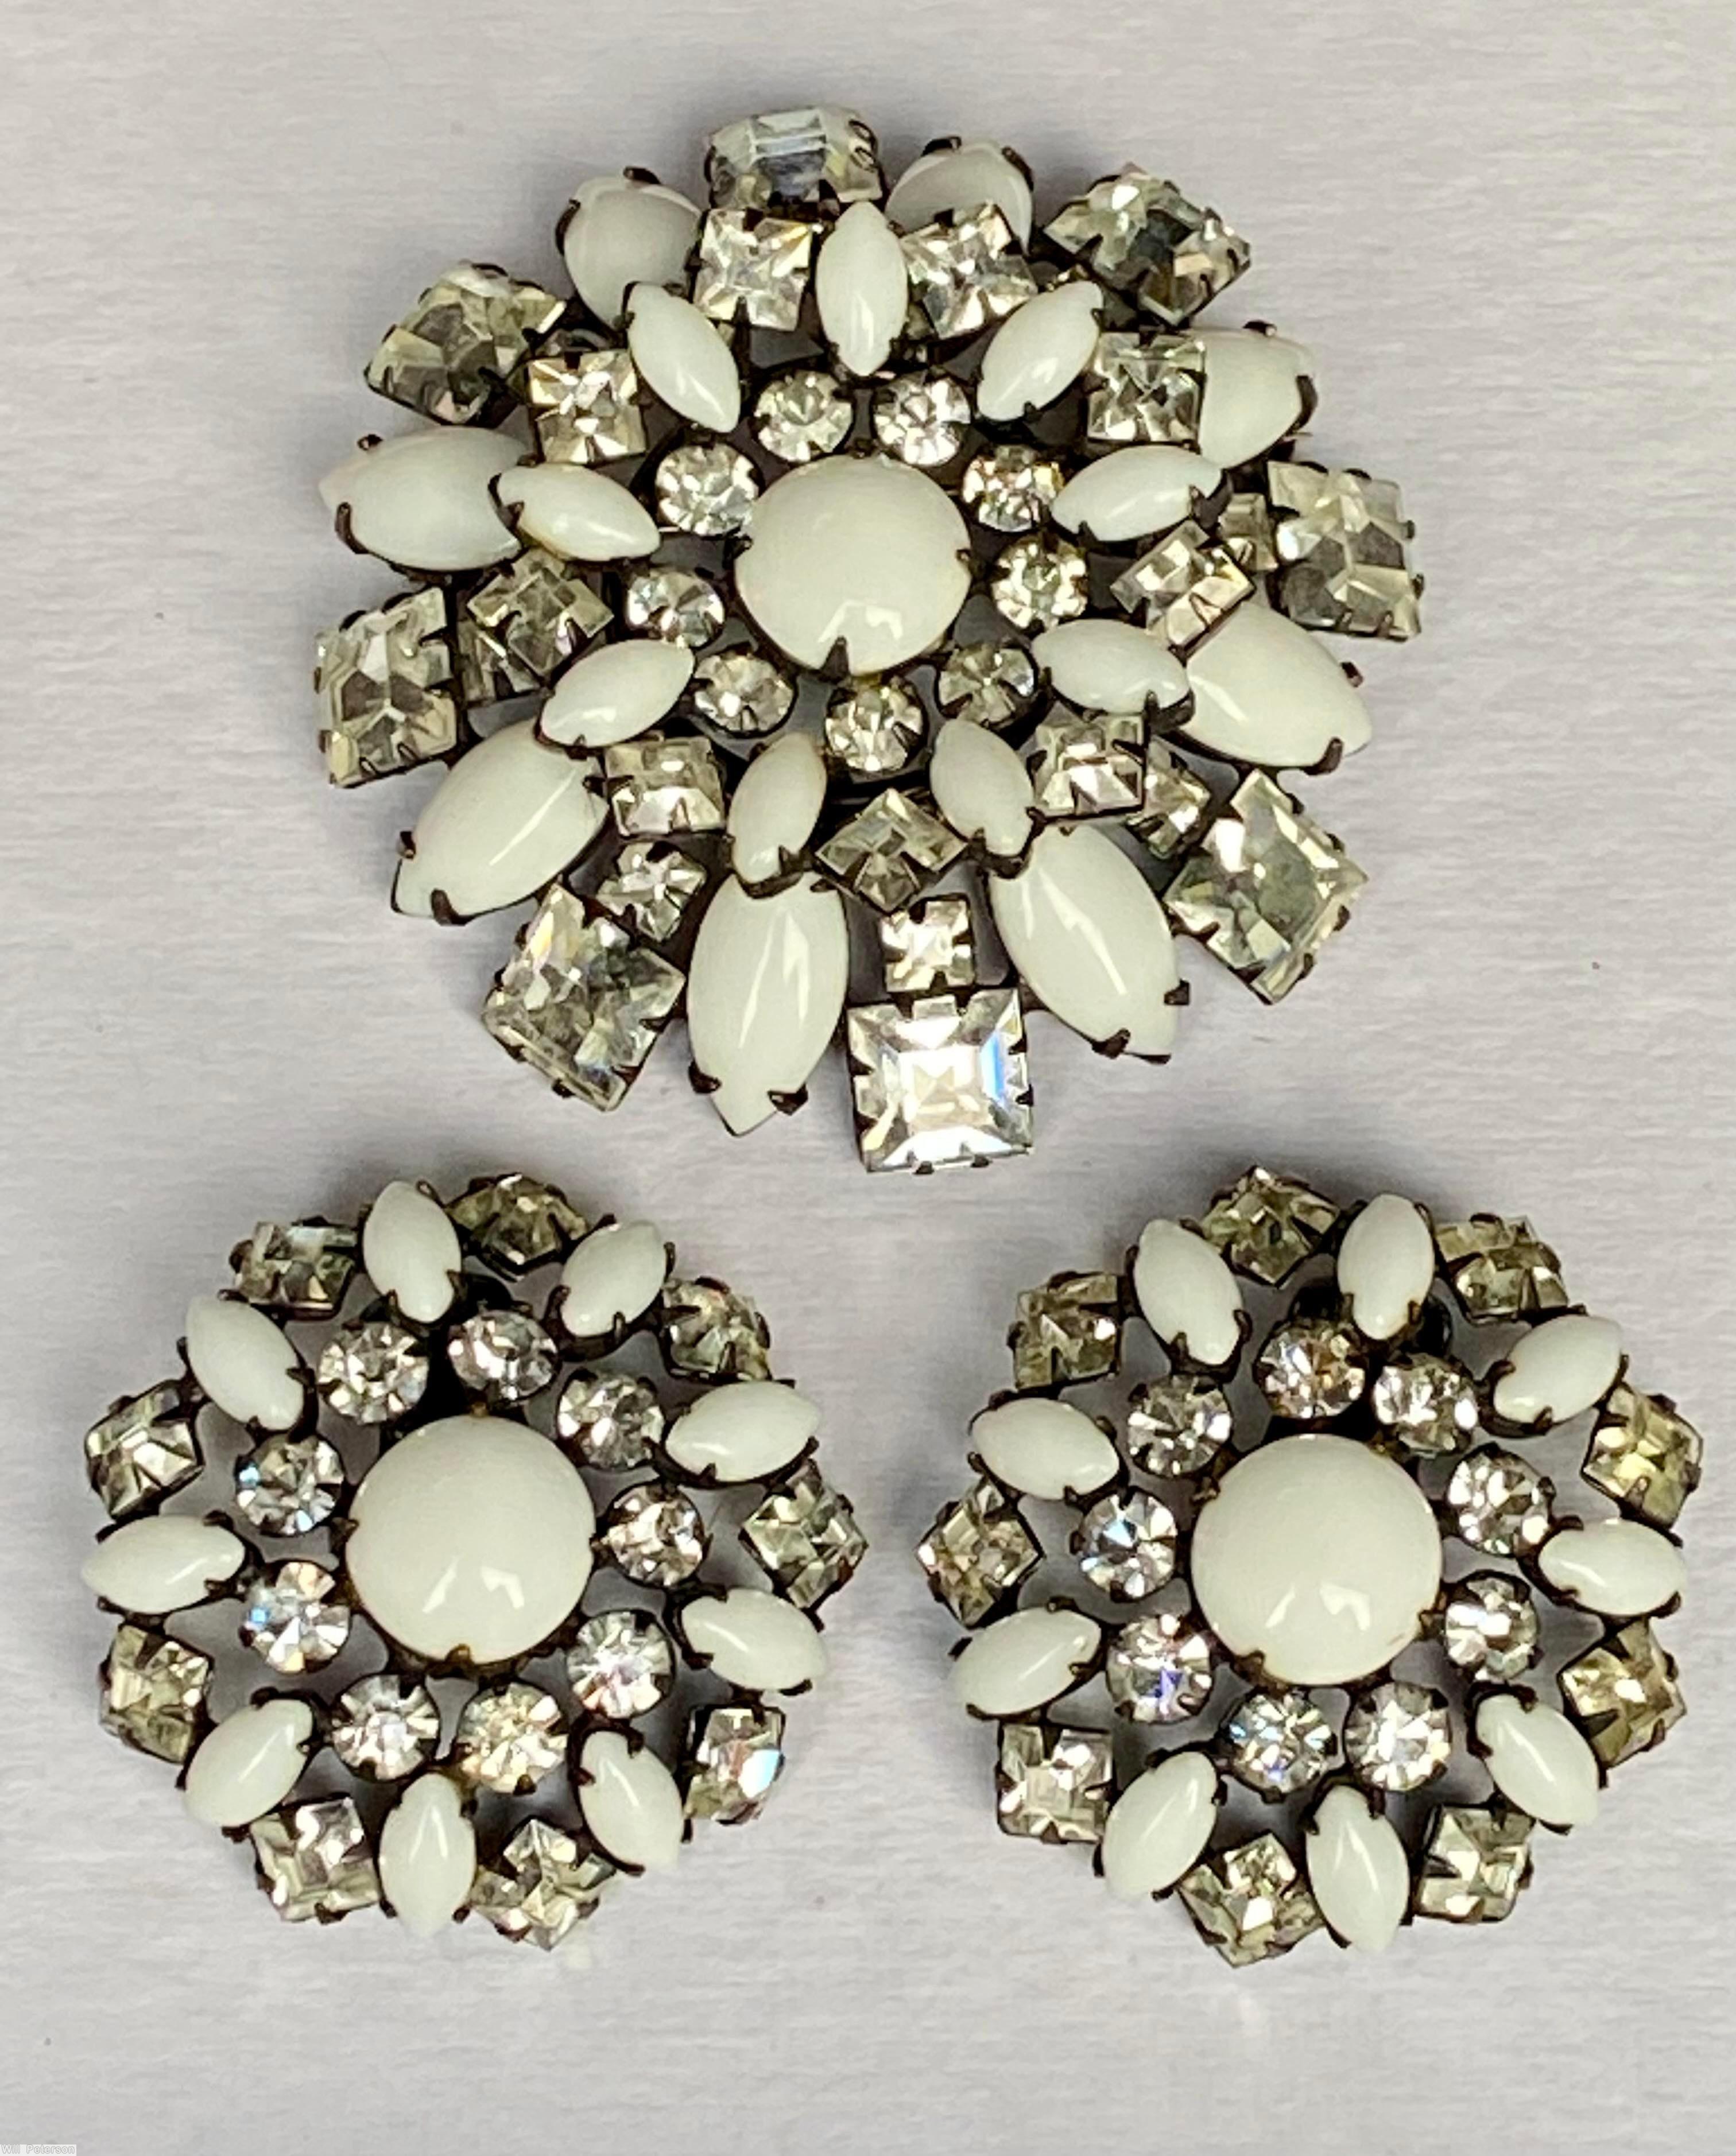 Schreiner domed round raditing pin 3 rounds round cabochon center 9 surrounding small chaton 9 small navette 9 small square 8 navette 8 square milk white crystal jewelry